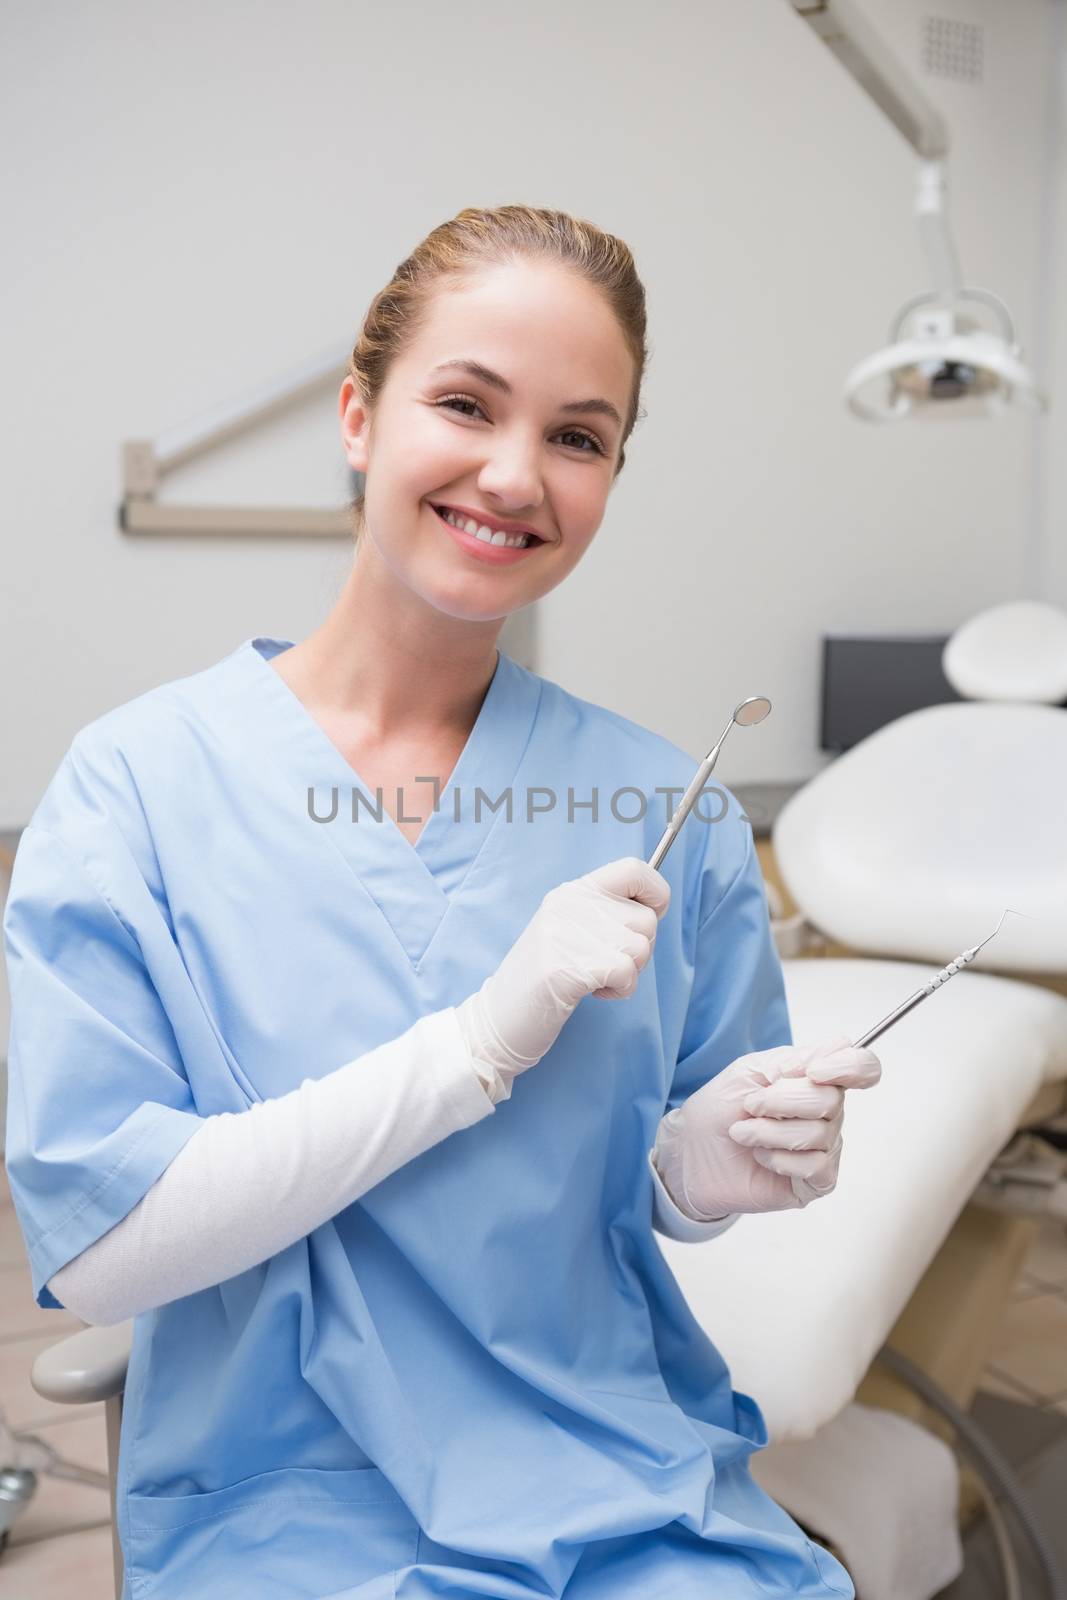 Dentist in blue scrubs smiling at camera holding tools at the dental clinic